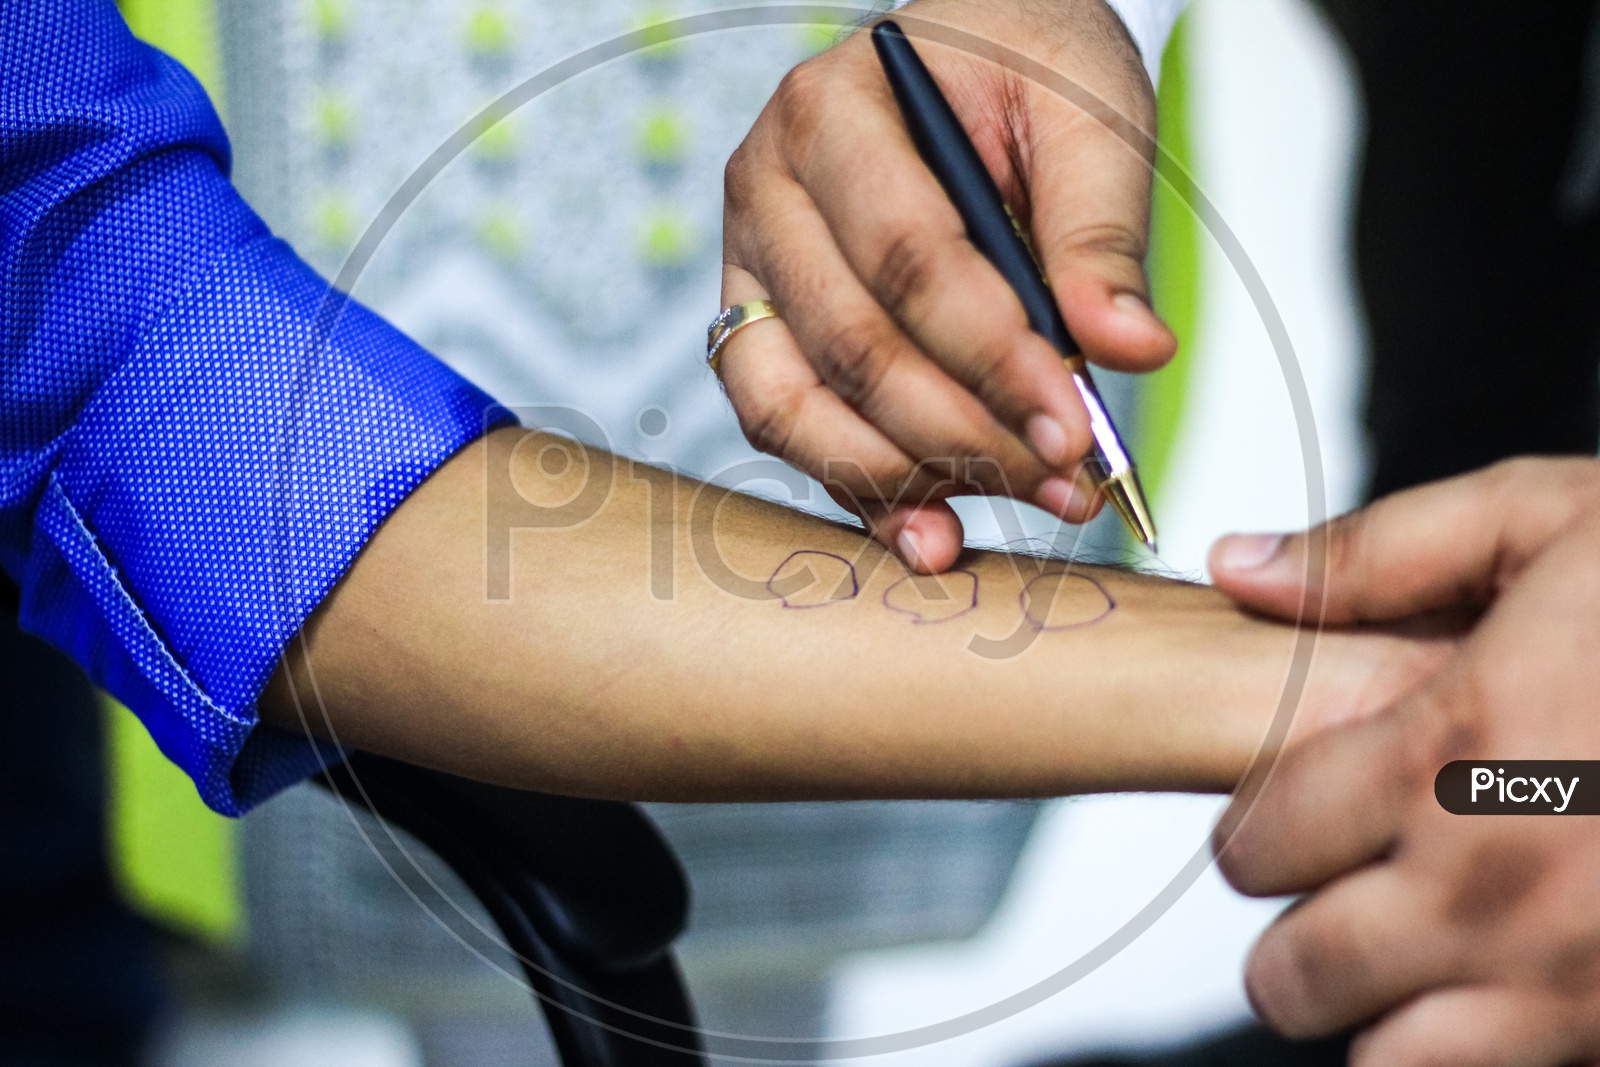 Skin Allergy Test Preparation By Doctor On A Patient Hand Using Allergy Sensitivity Kit